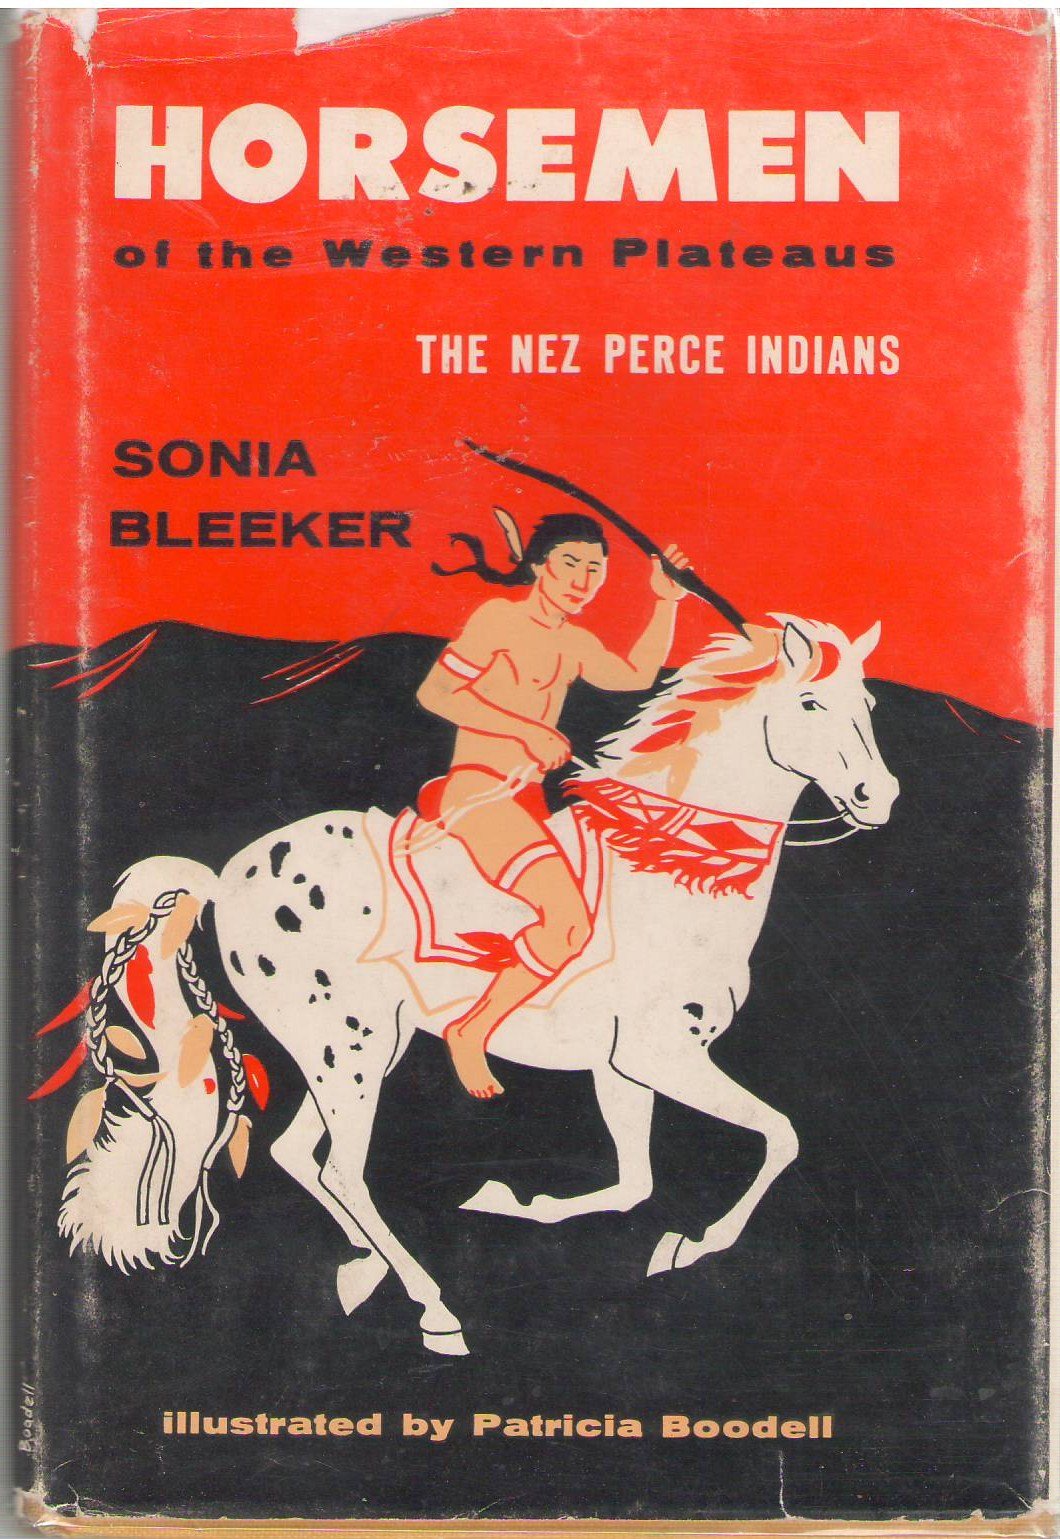 Horsemen of the western plateaus: The Nez Perce Indians (book cover)